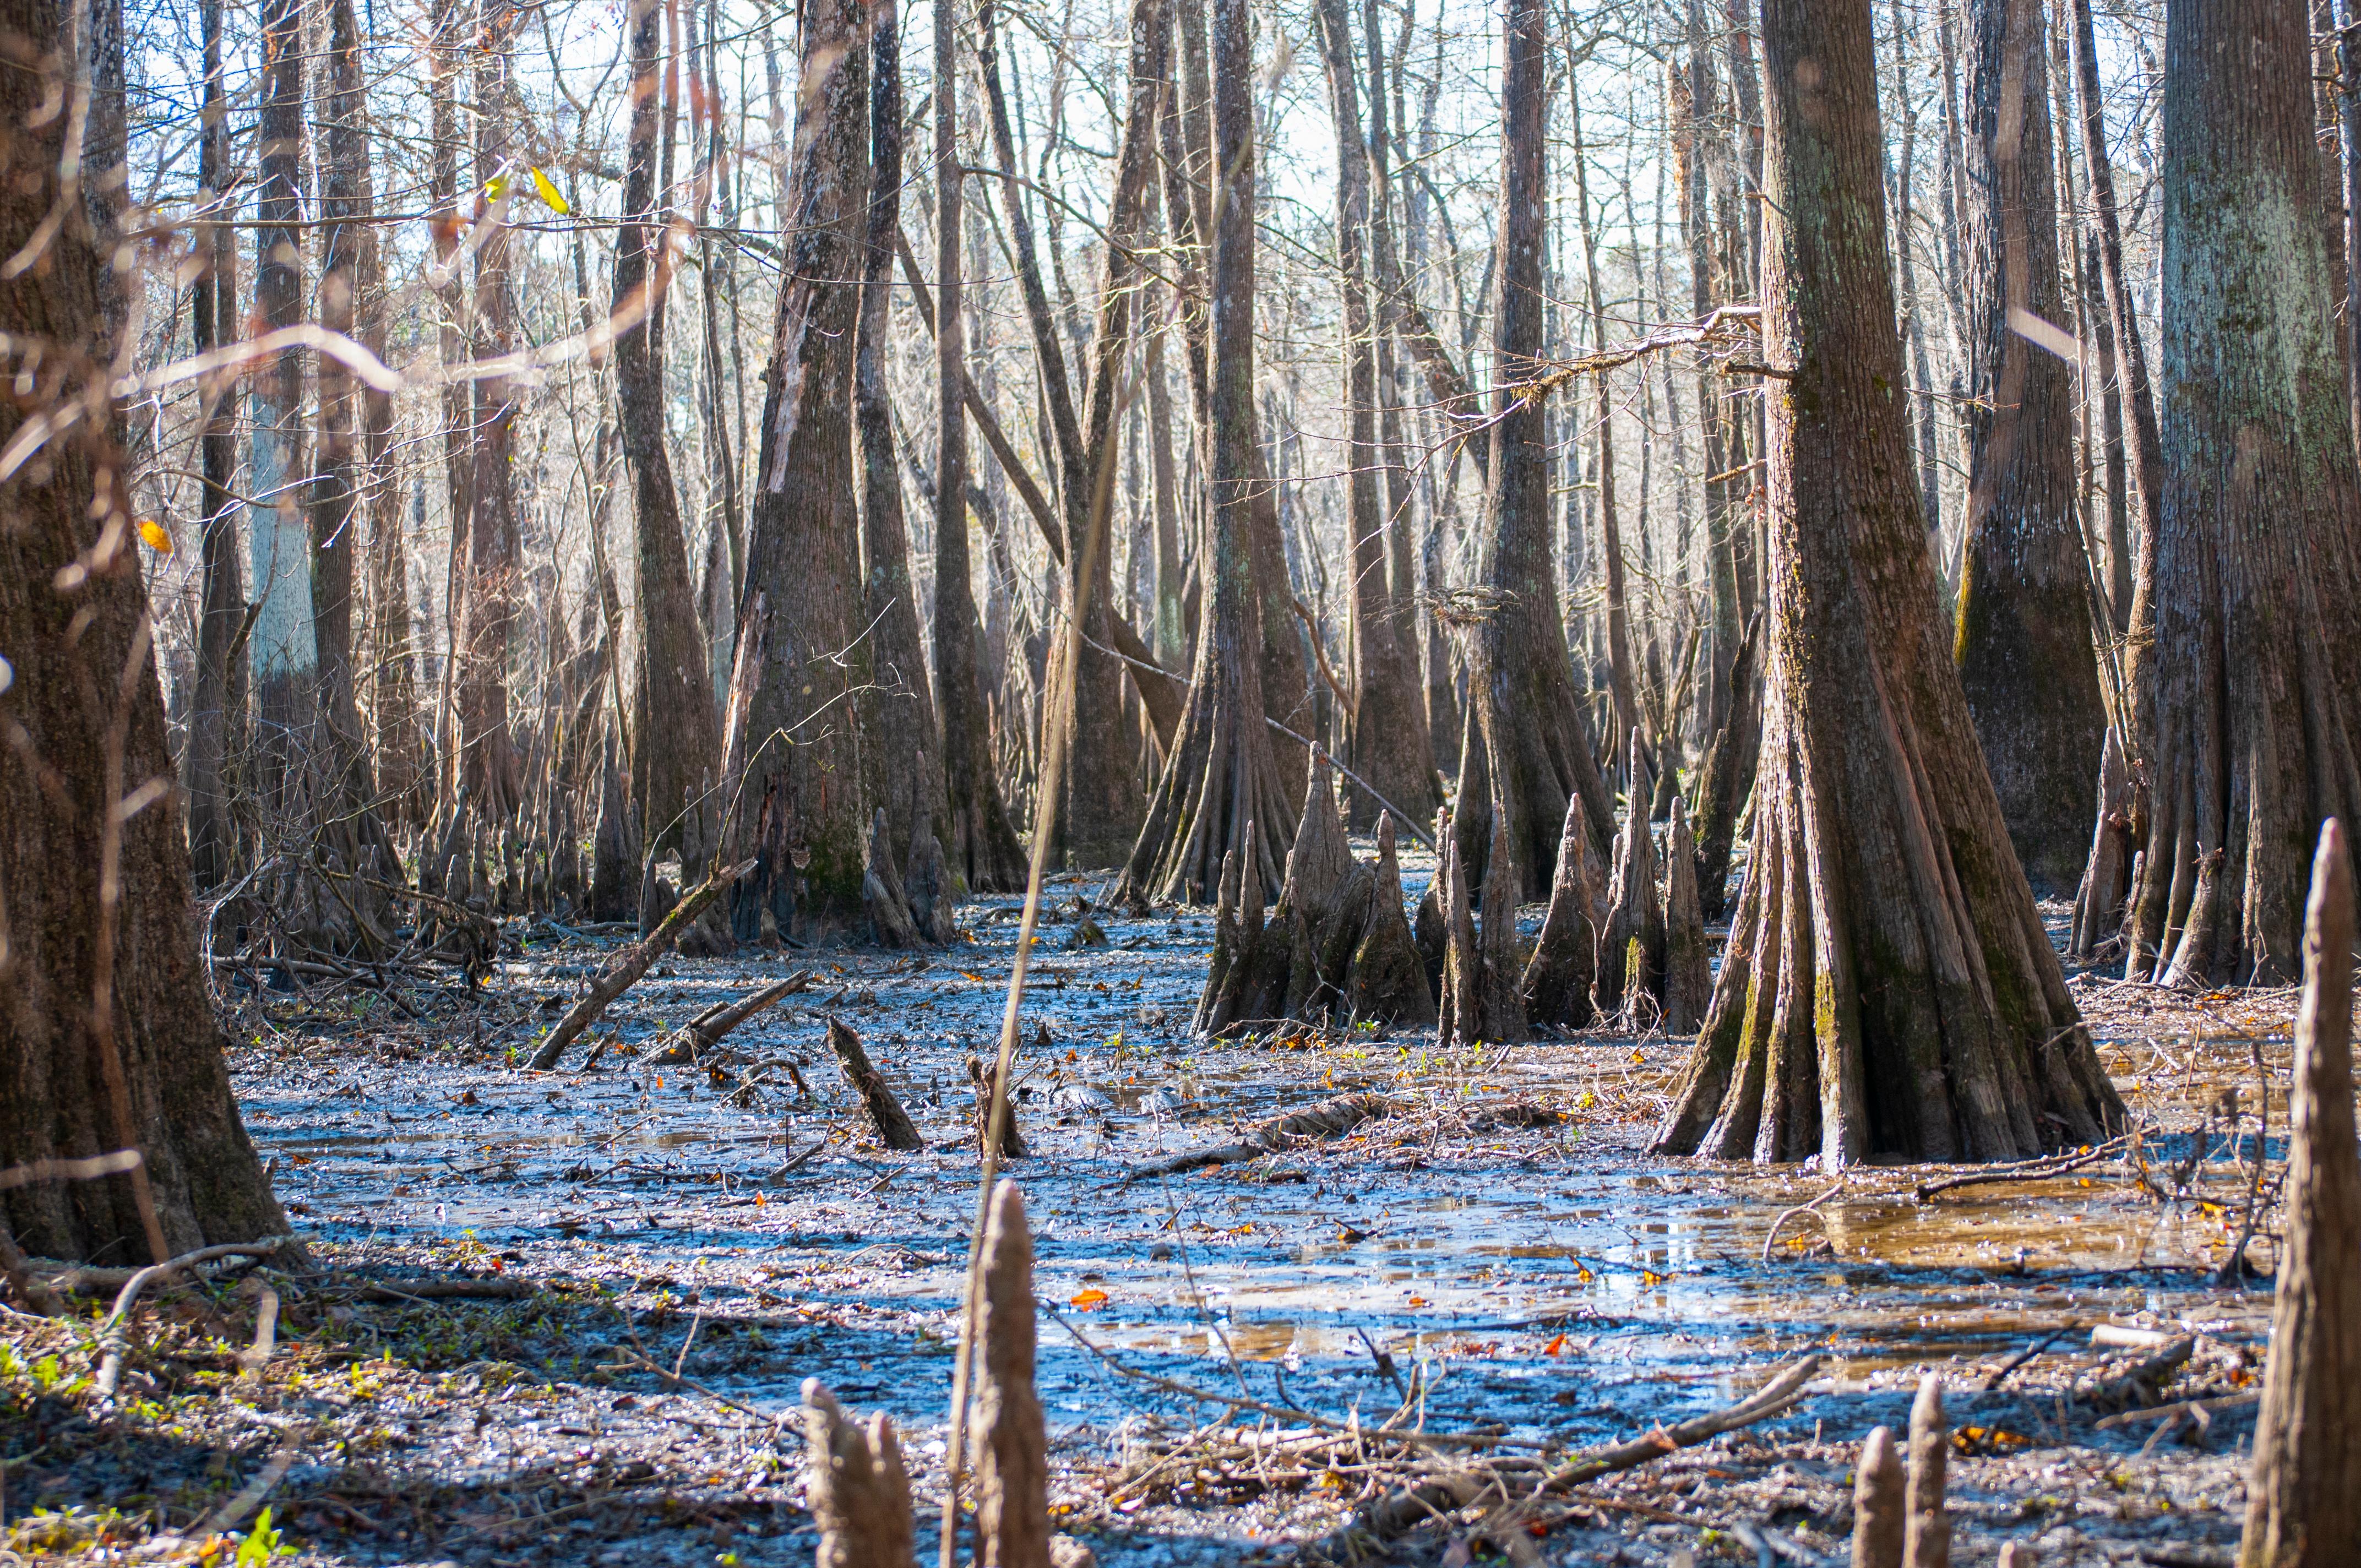 Leafless bald cypress trees and knees stand in a swamp filled with leaves and branches in winter.